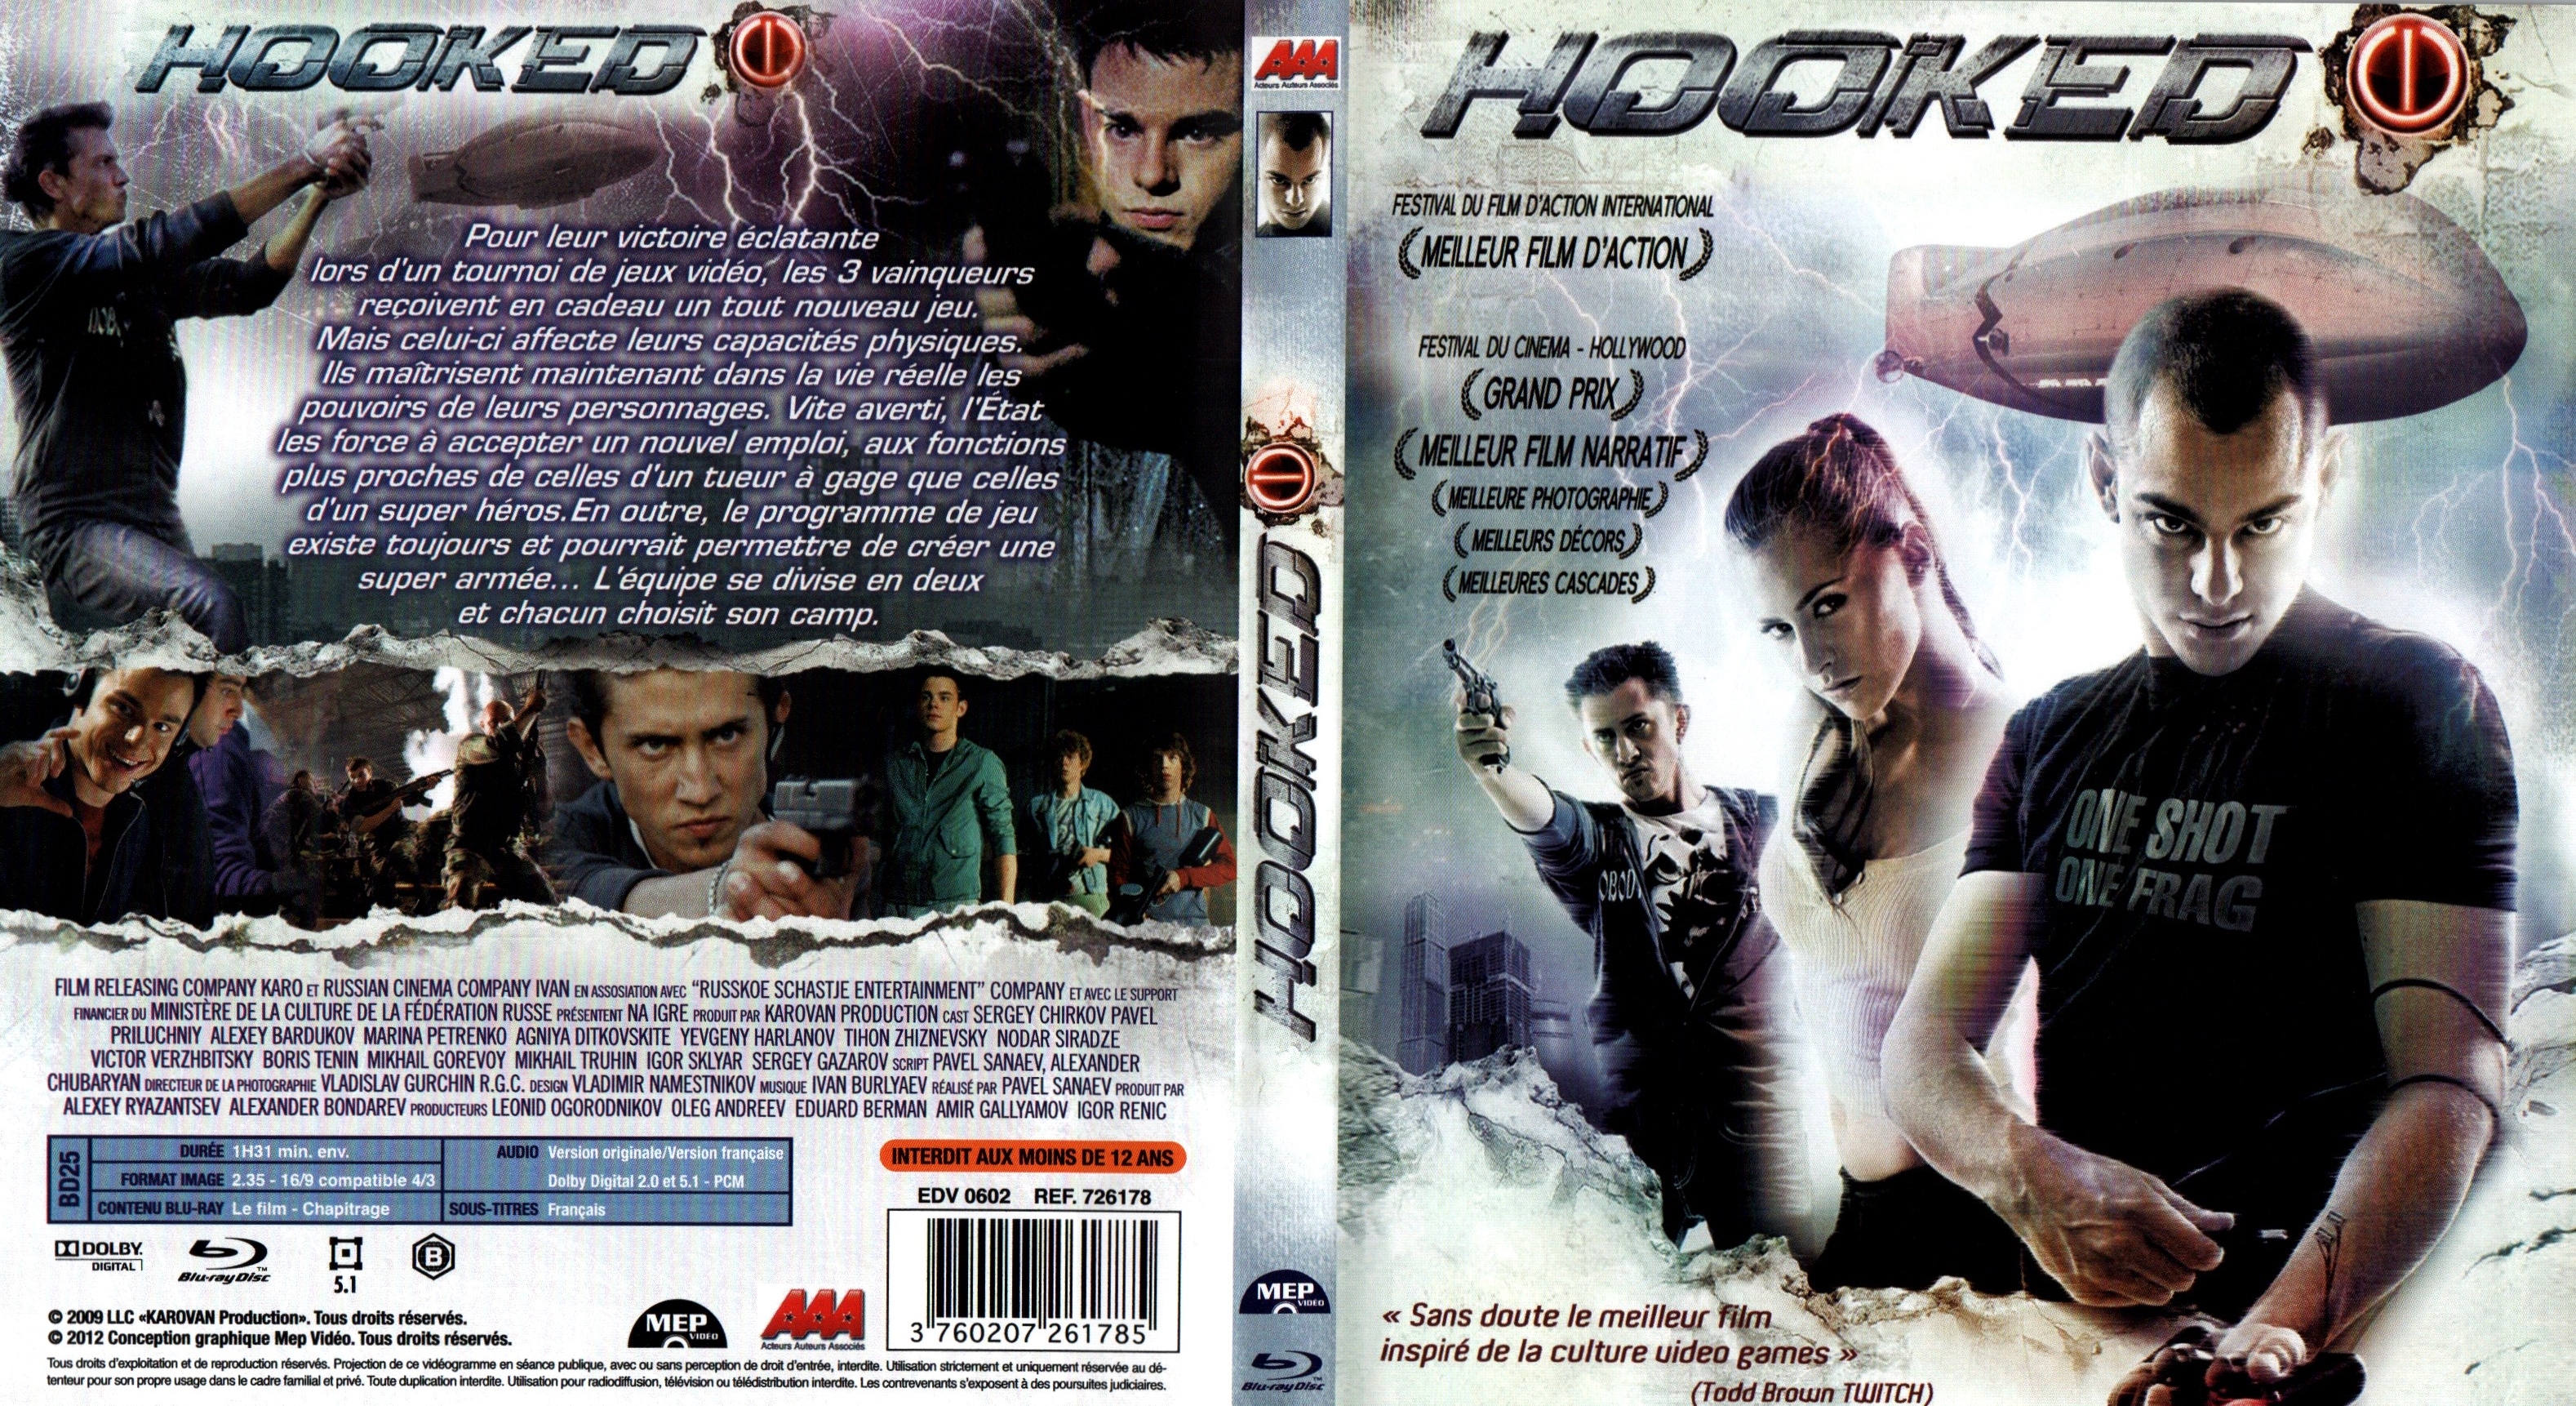 Jaquette DVD Hooked (BLU-RAY)